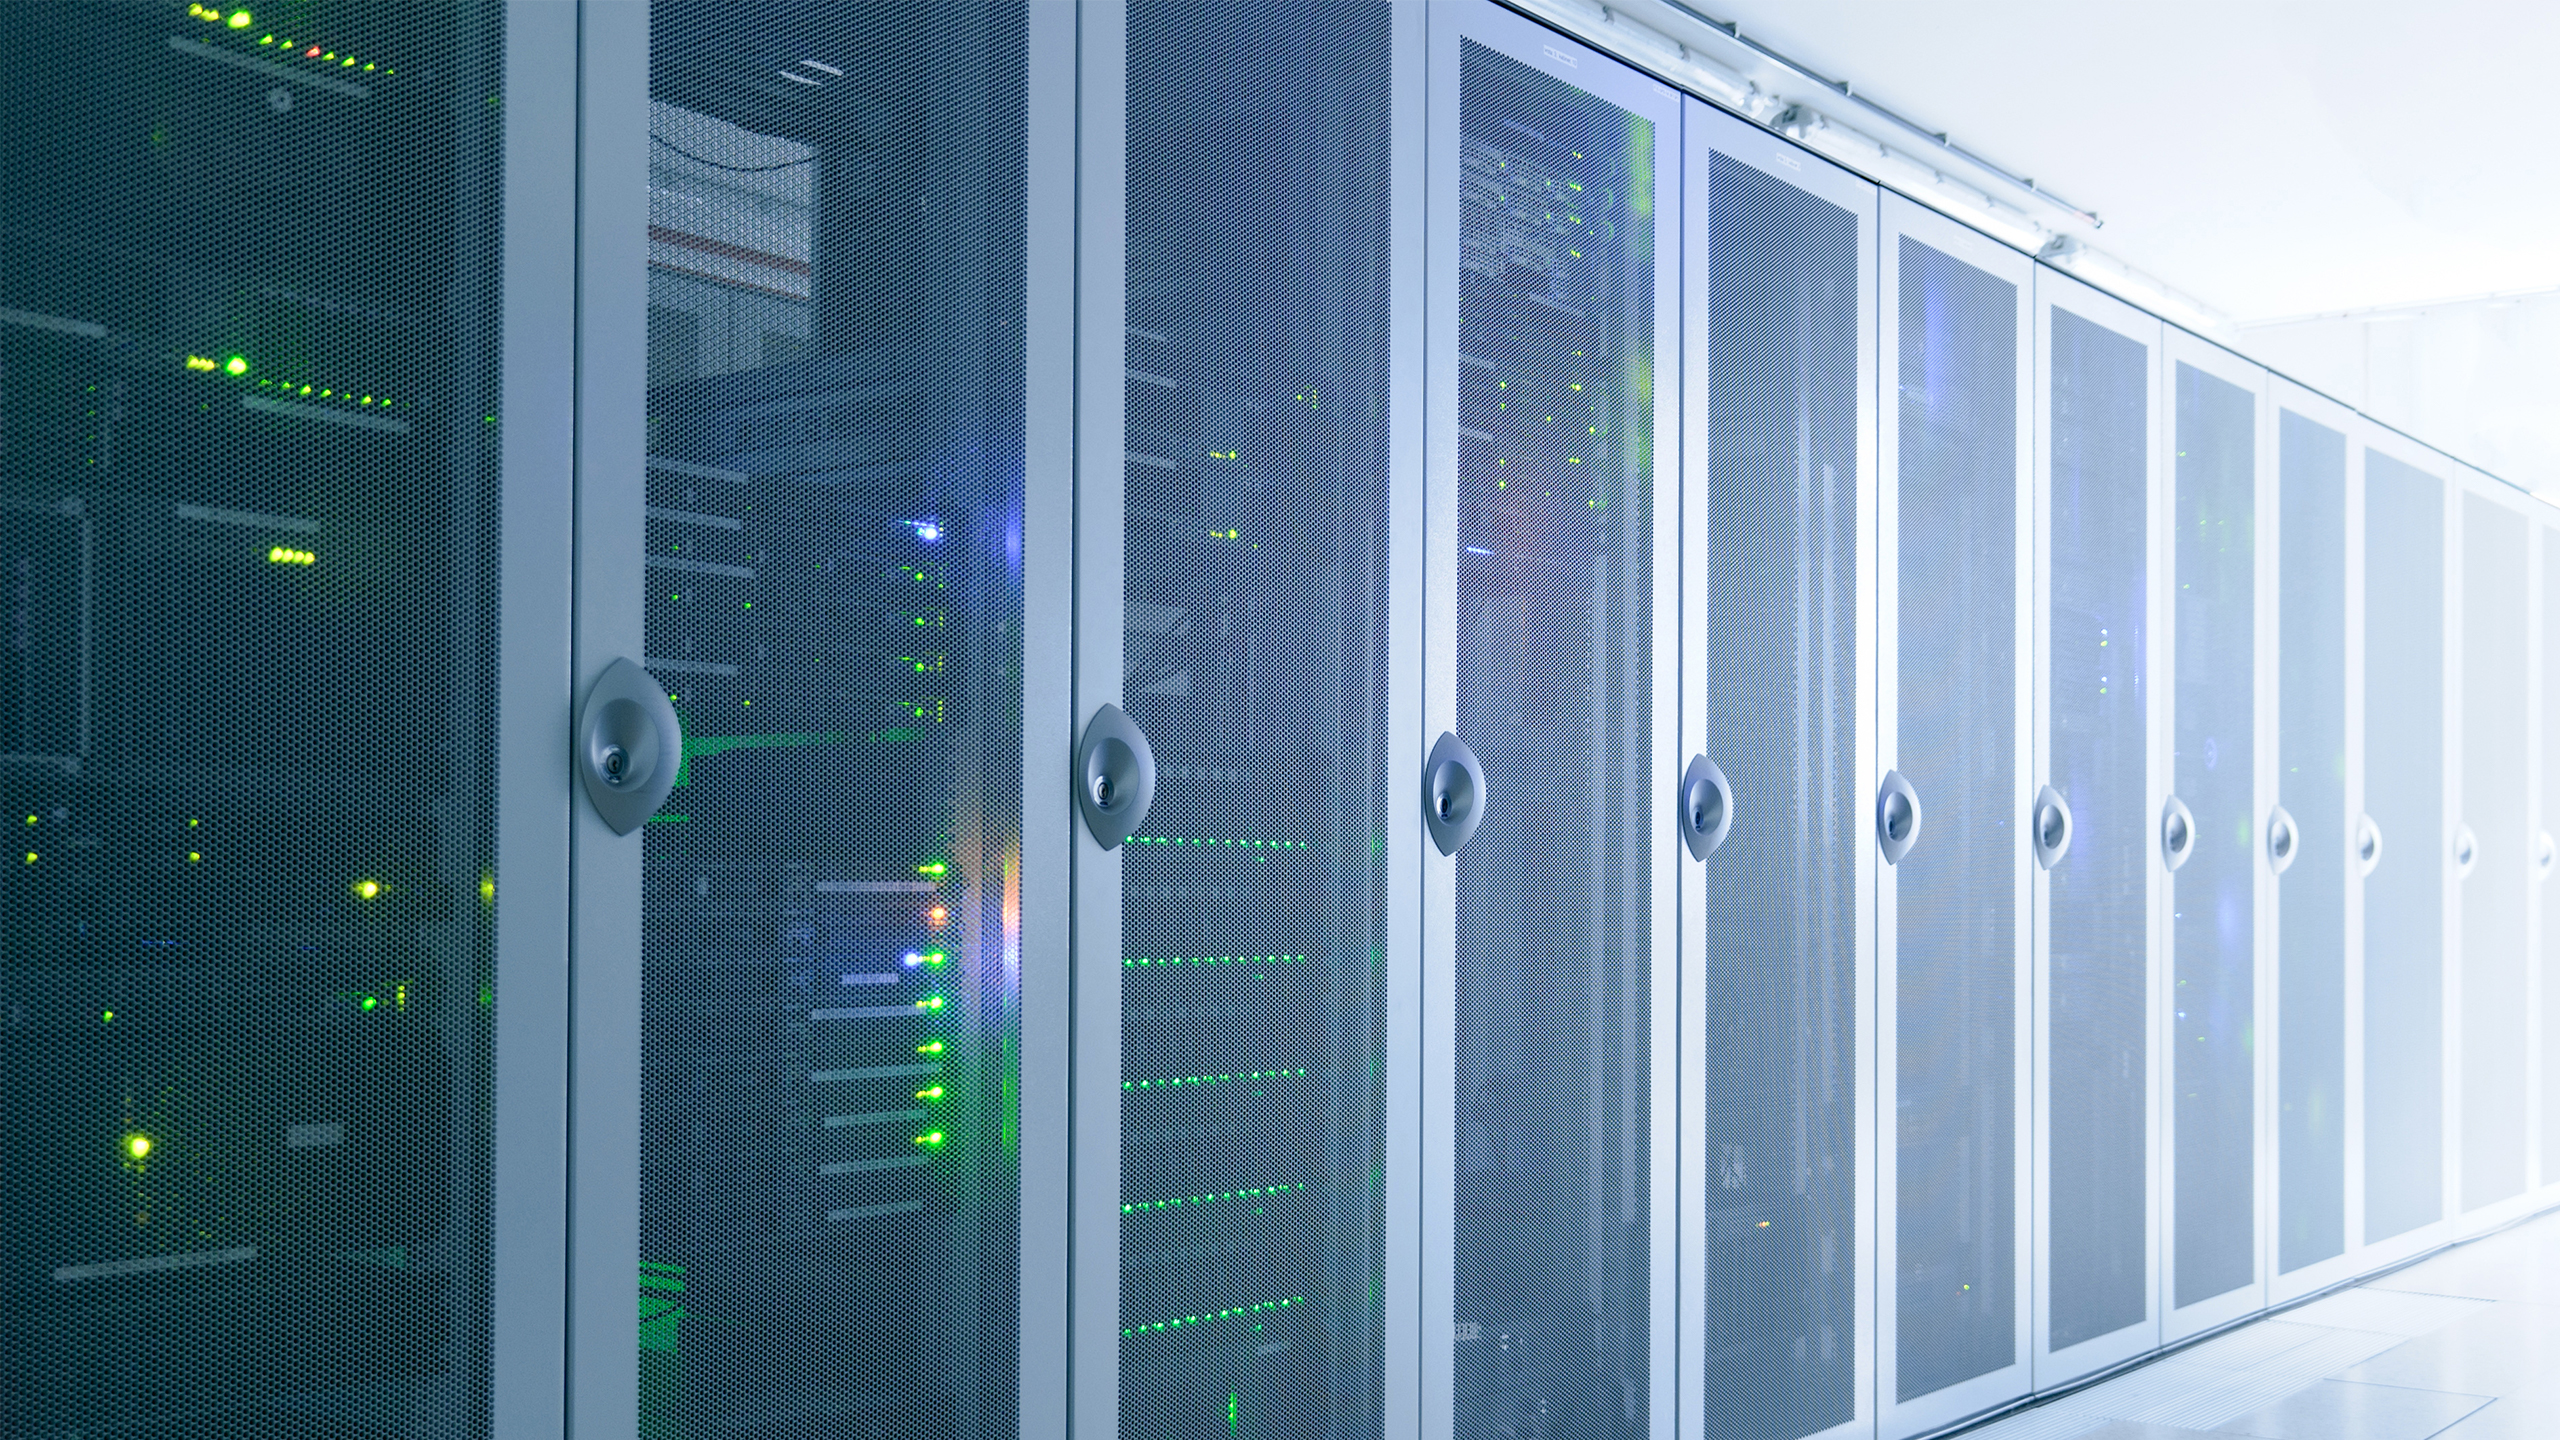 What is a Colocation Data Center?